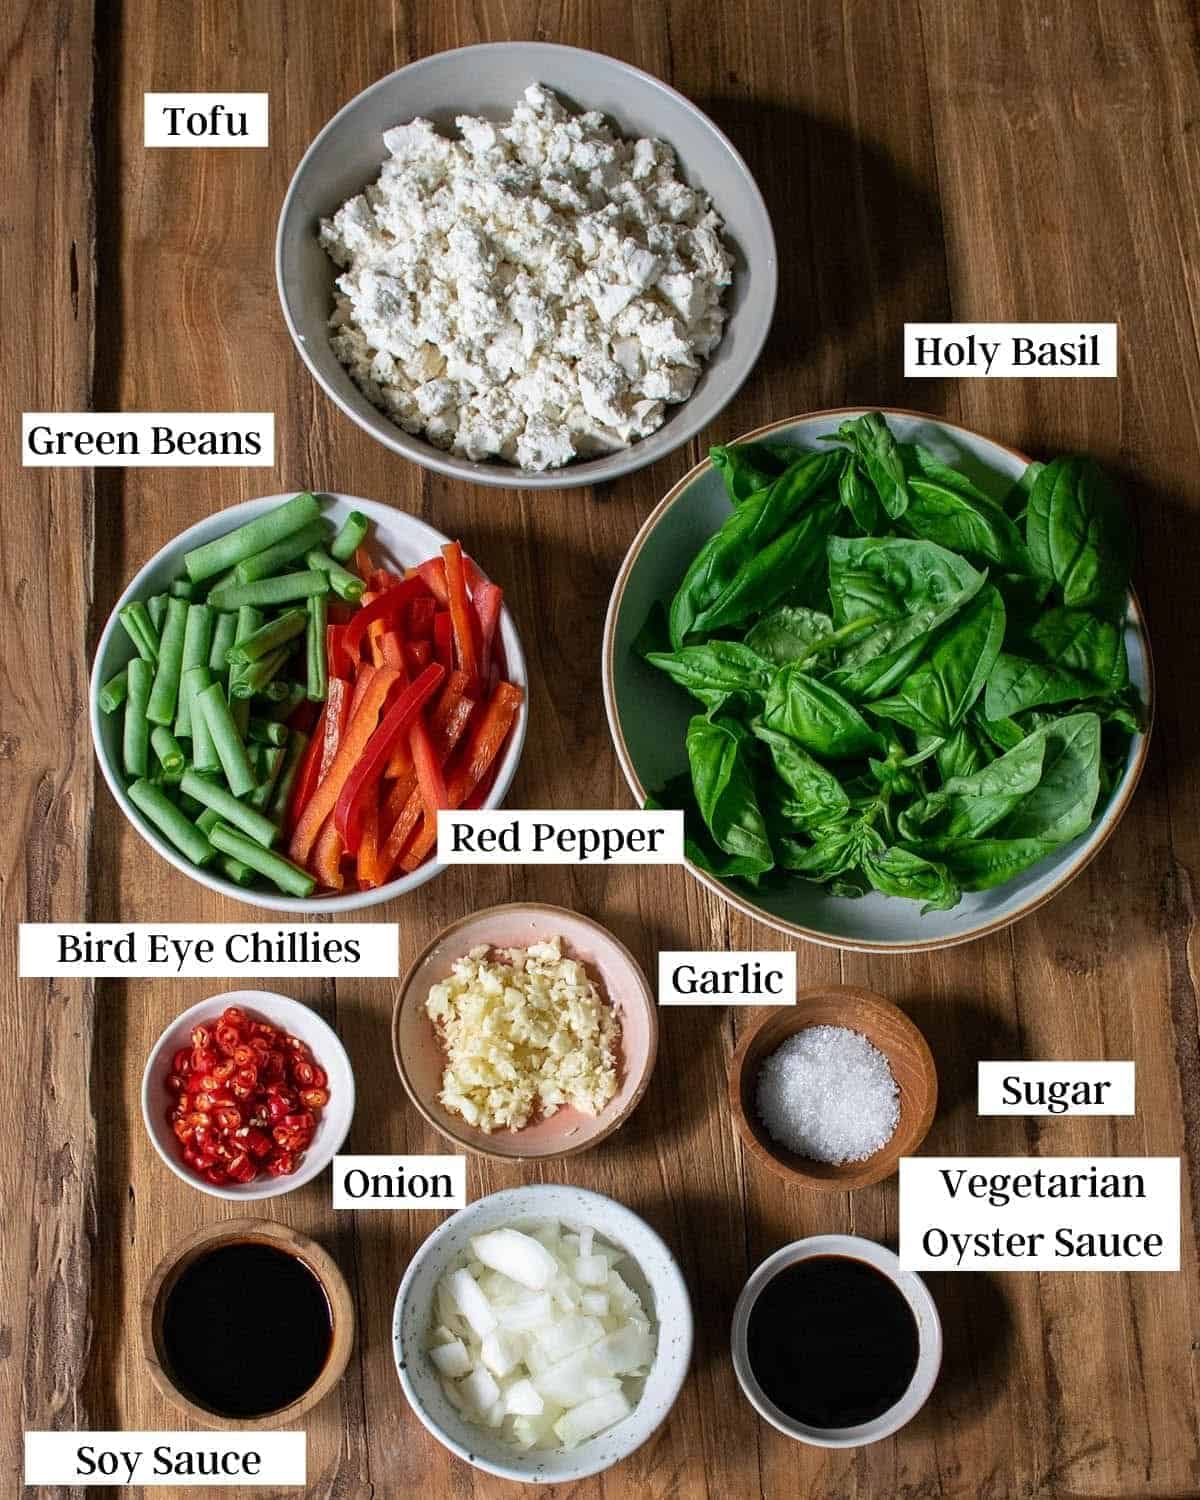 Ingredients laid out on a table with written labels